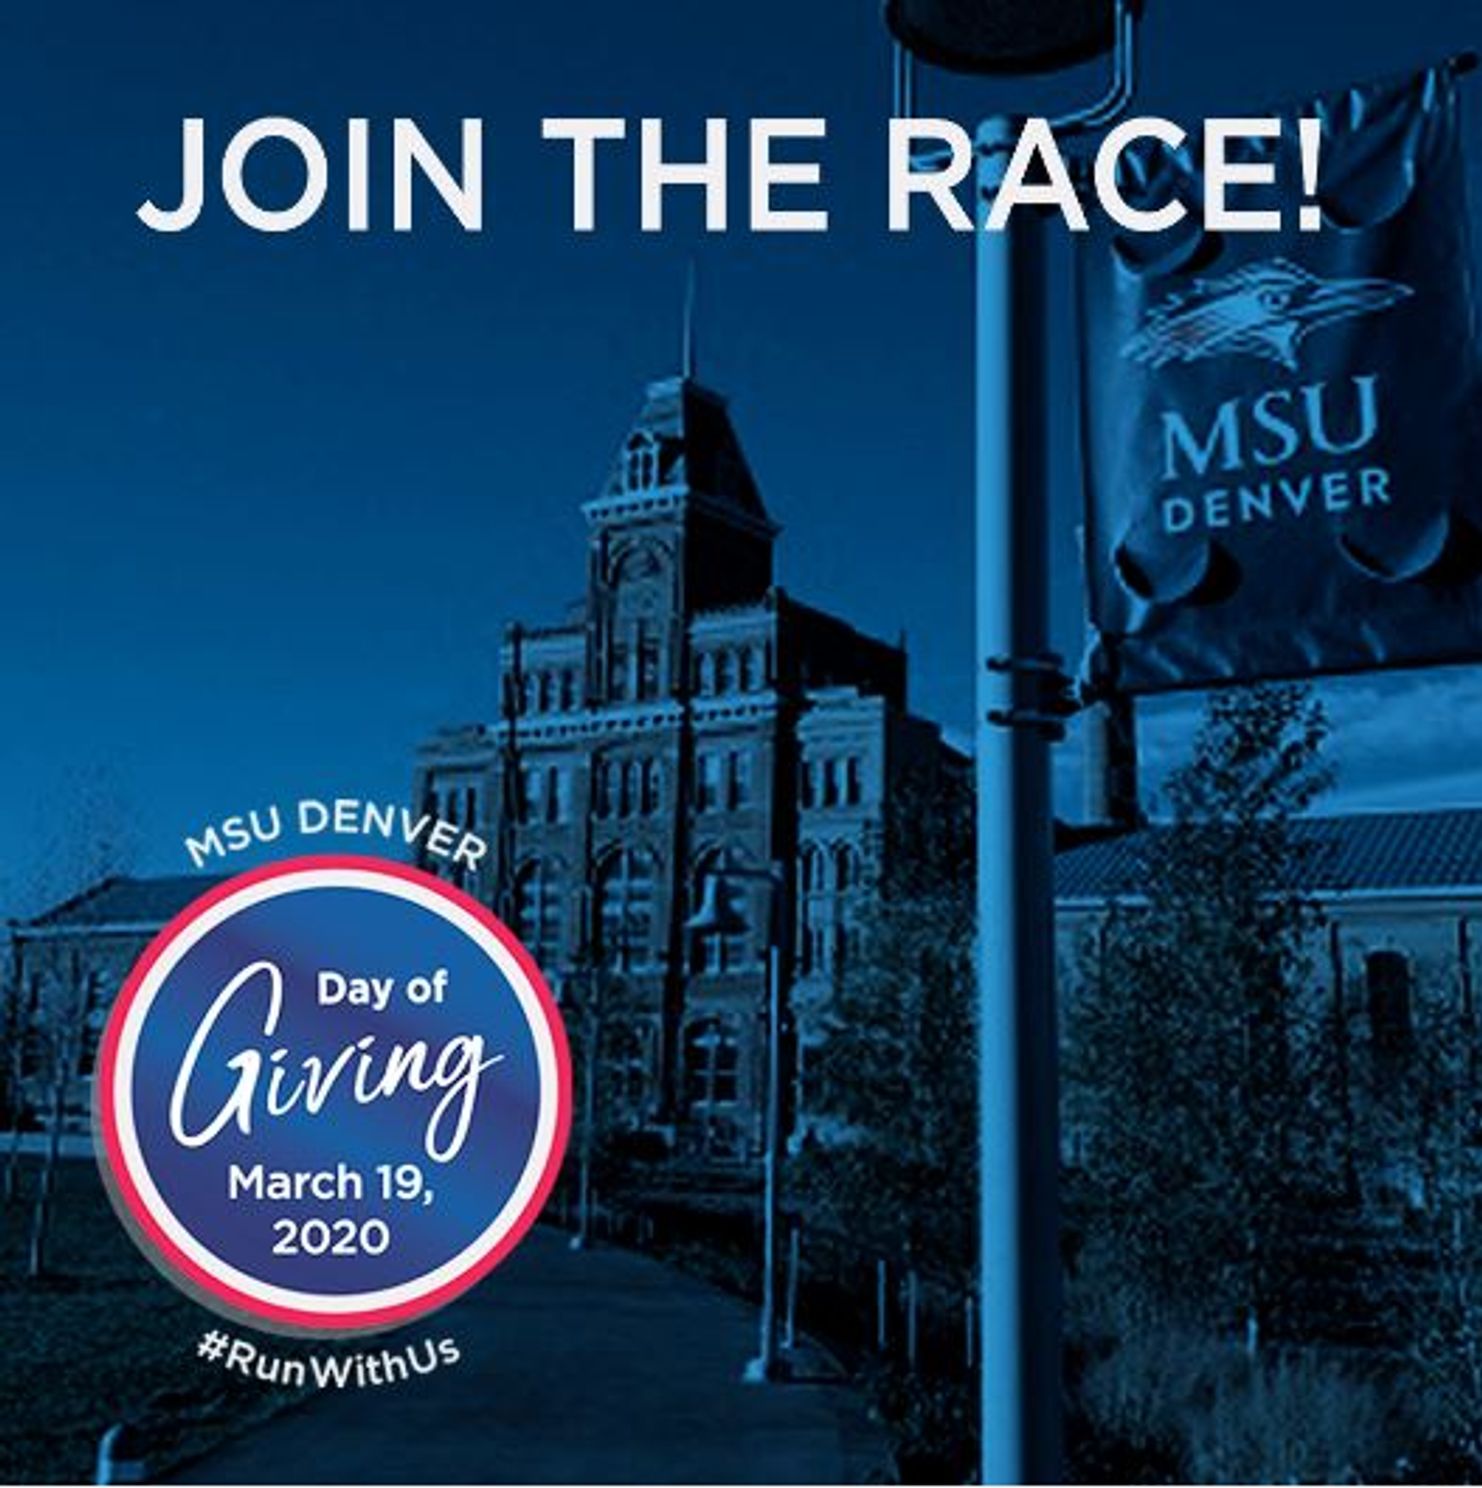 MSU Denver Day of Giving Join the Race promotional image with Tivoli Student Center in background